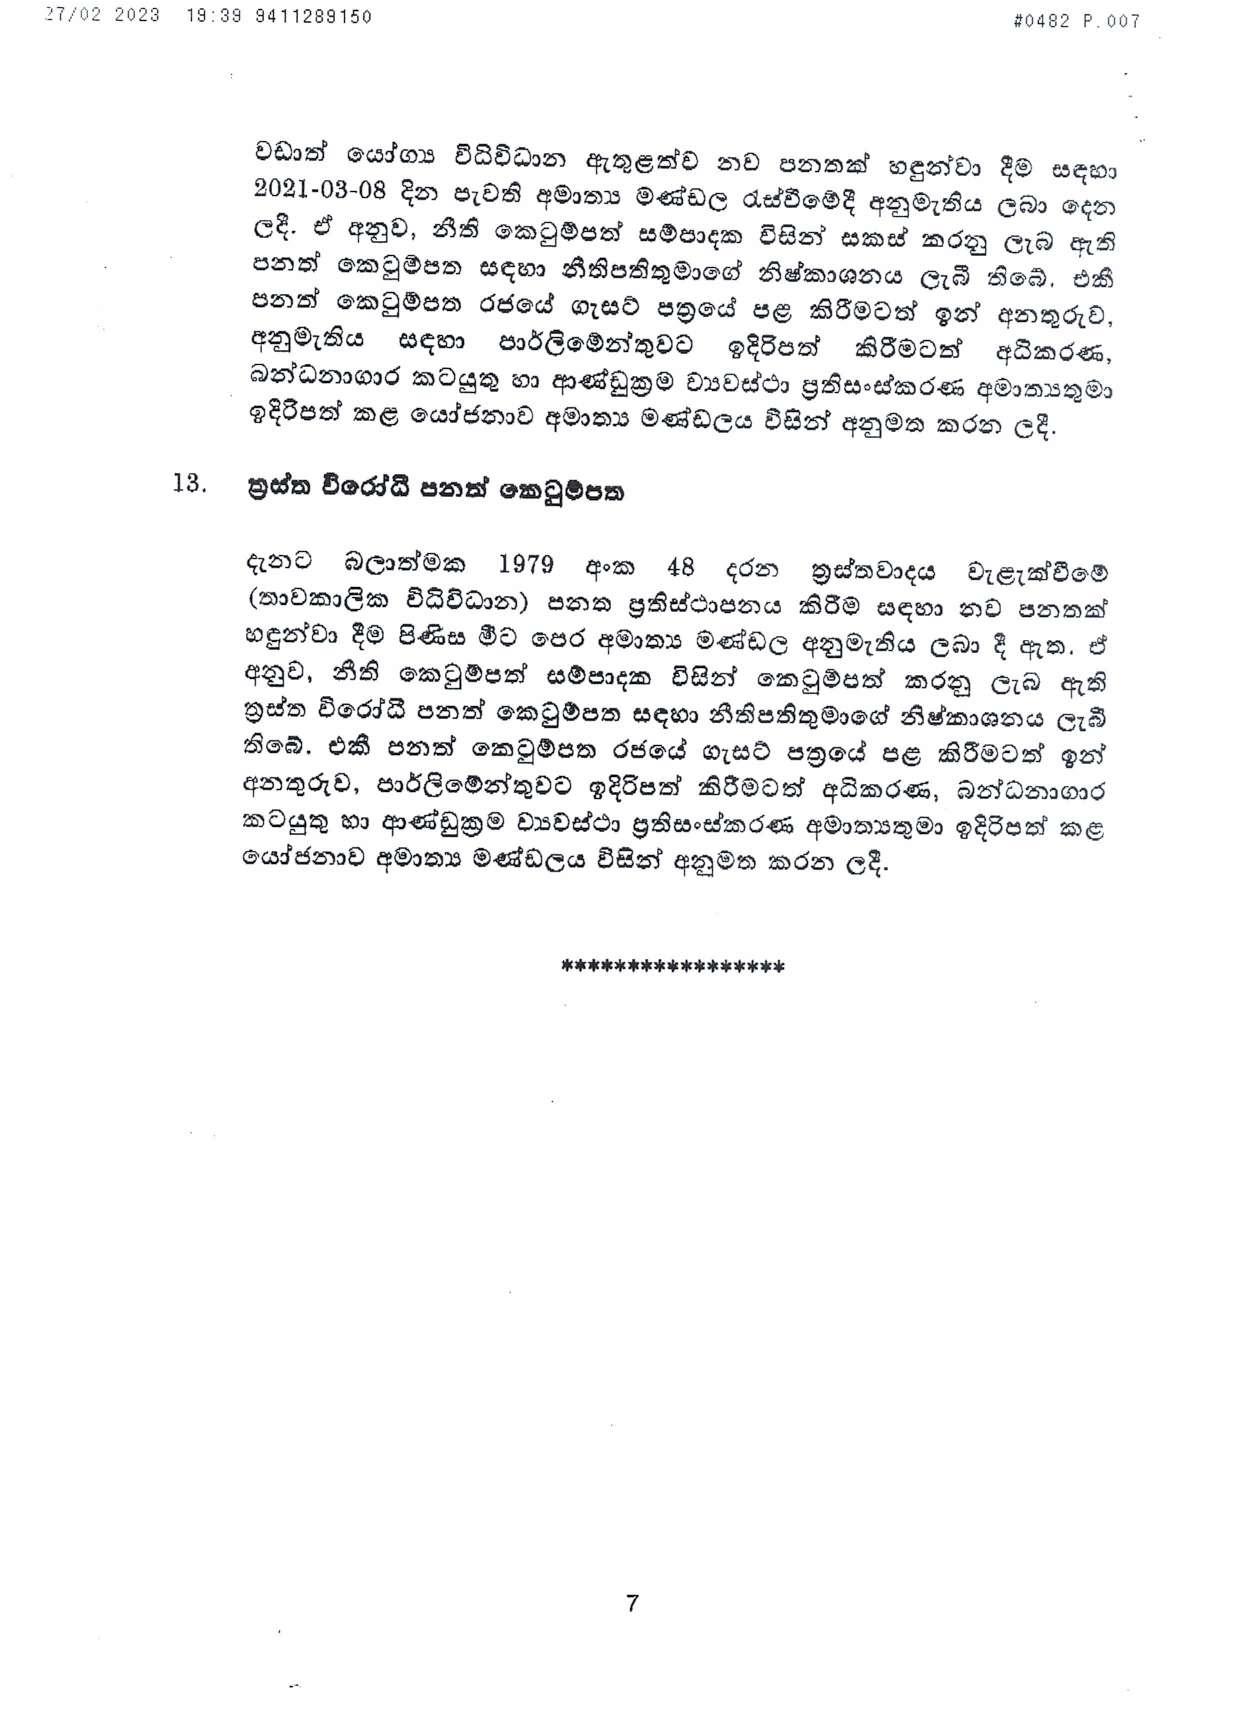 Cabinet Decision on 27.07.2023 page 007